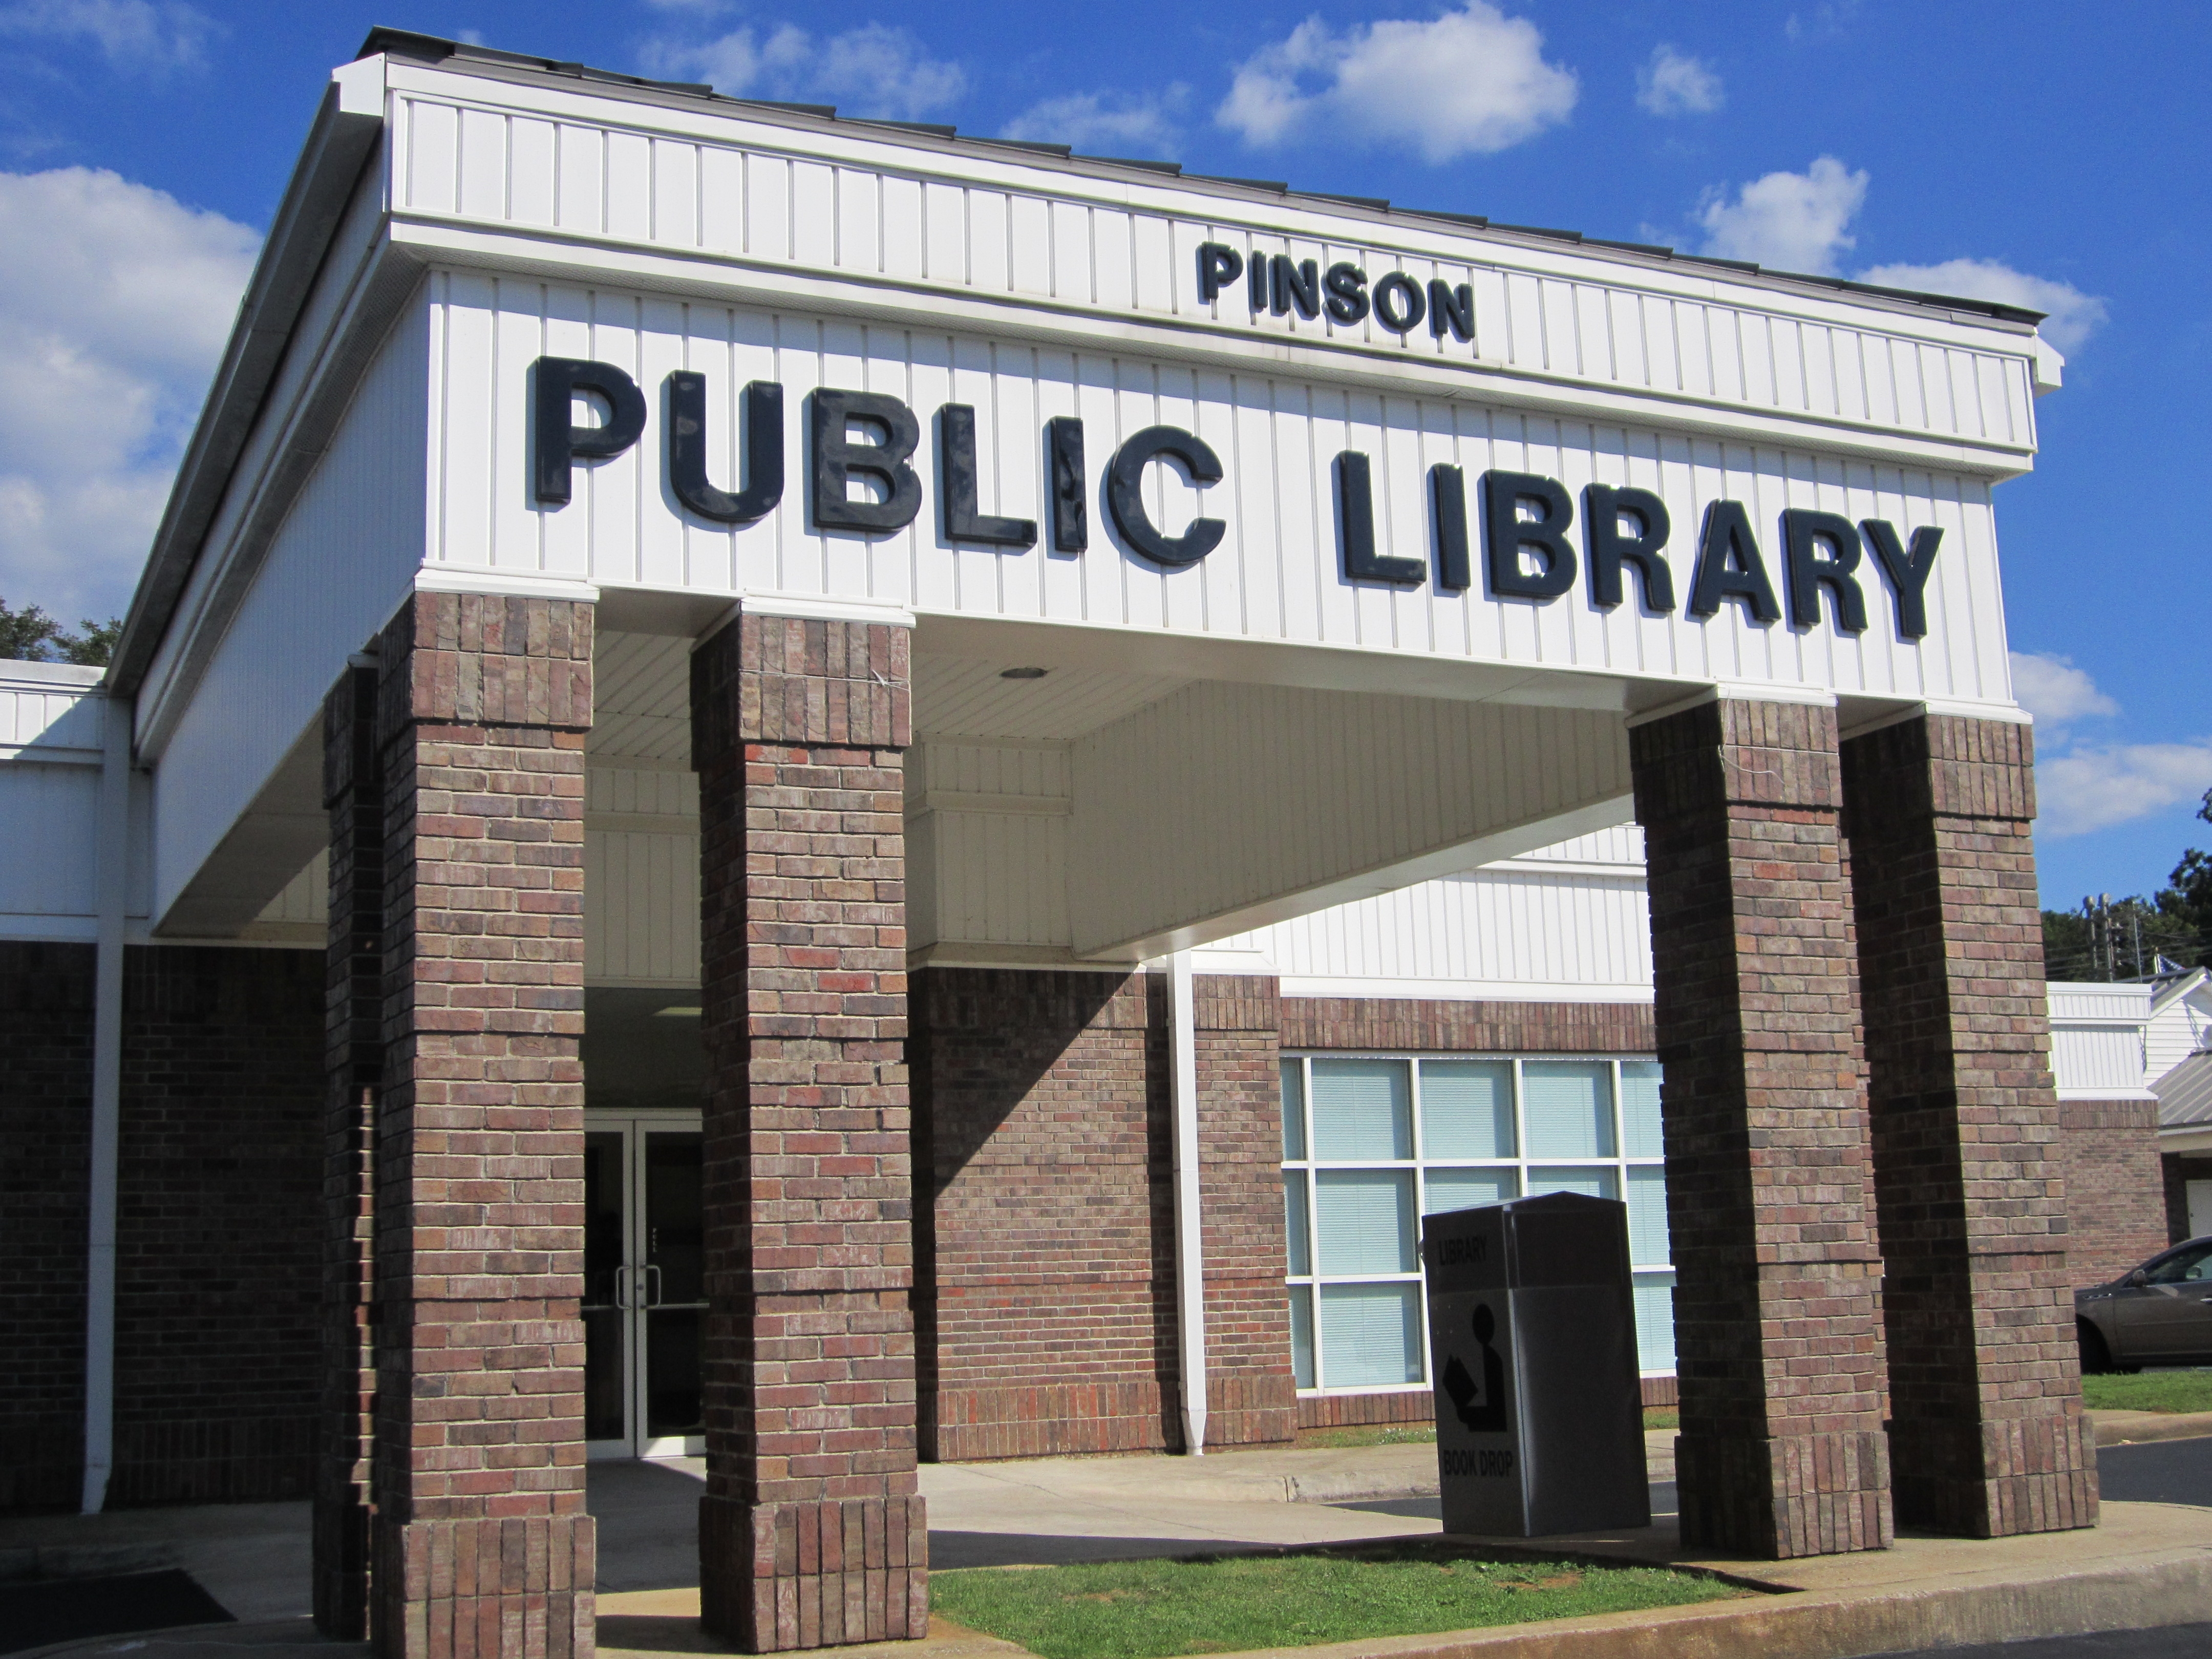 Pinson library qualifies for 4 grants totaling $13,000 